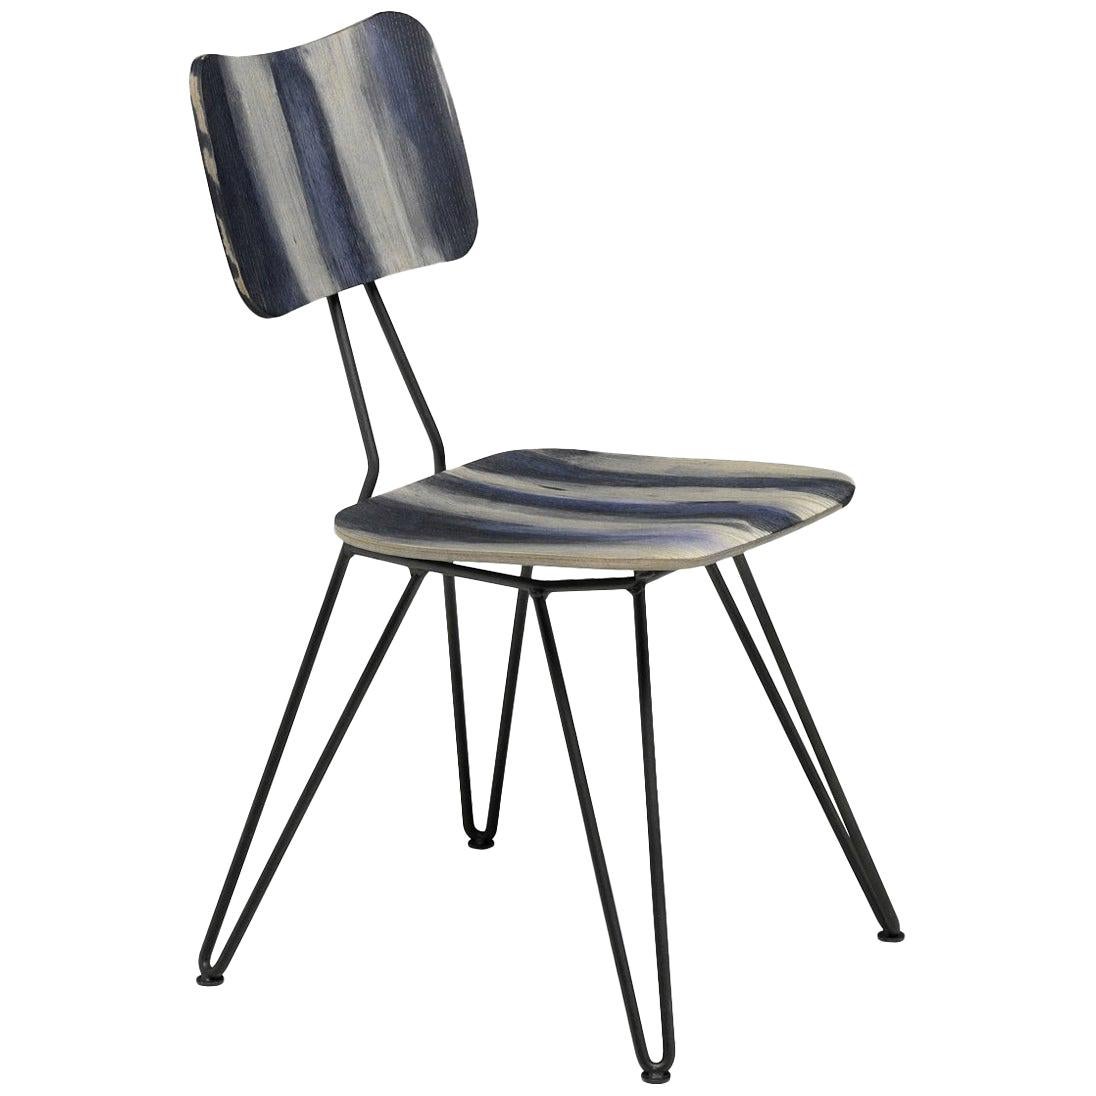 "Overdyed" Aniline Dyed Ash Plywood Shell and Steel Chair by Moroso for Diesel For Sale